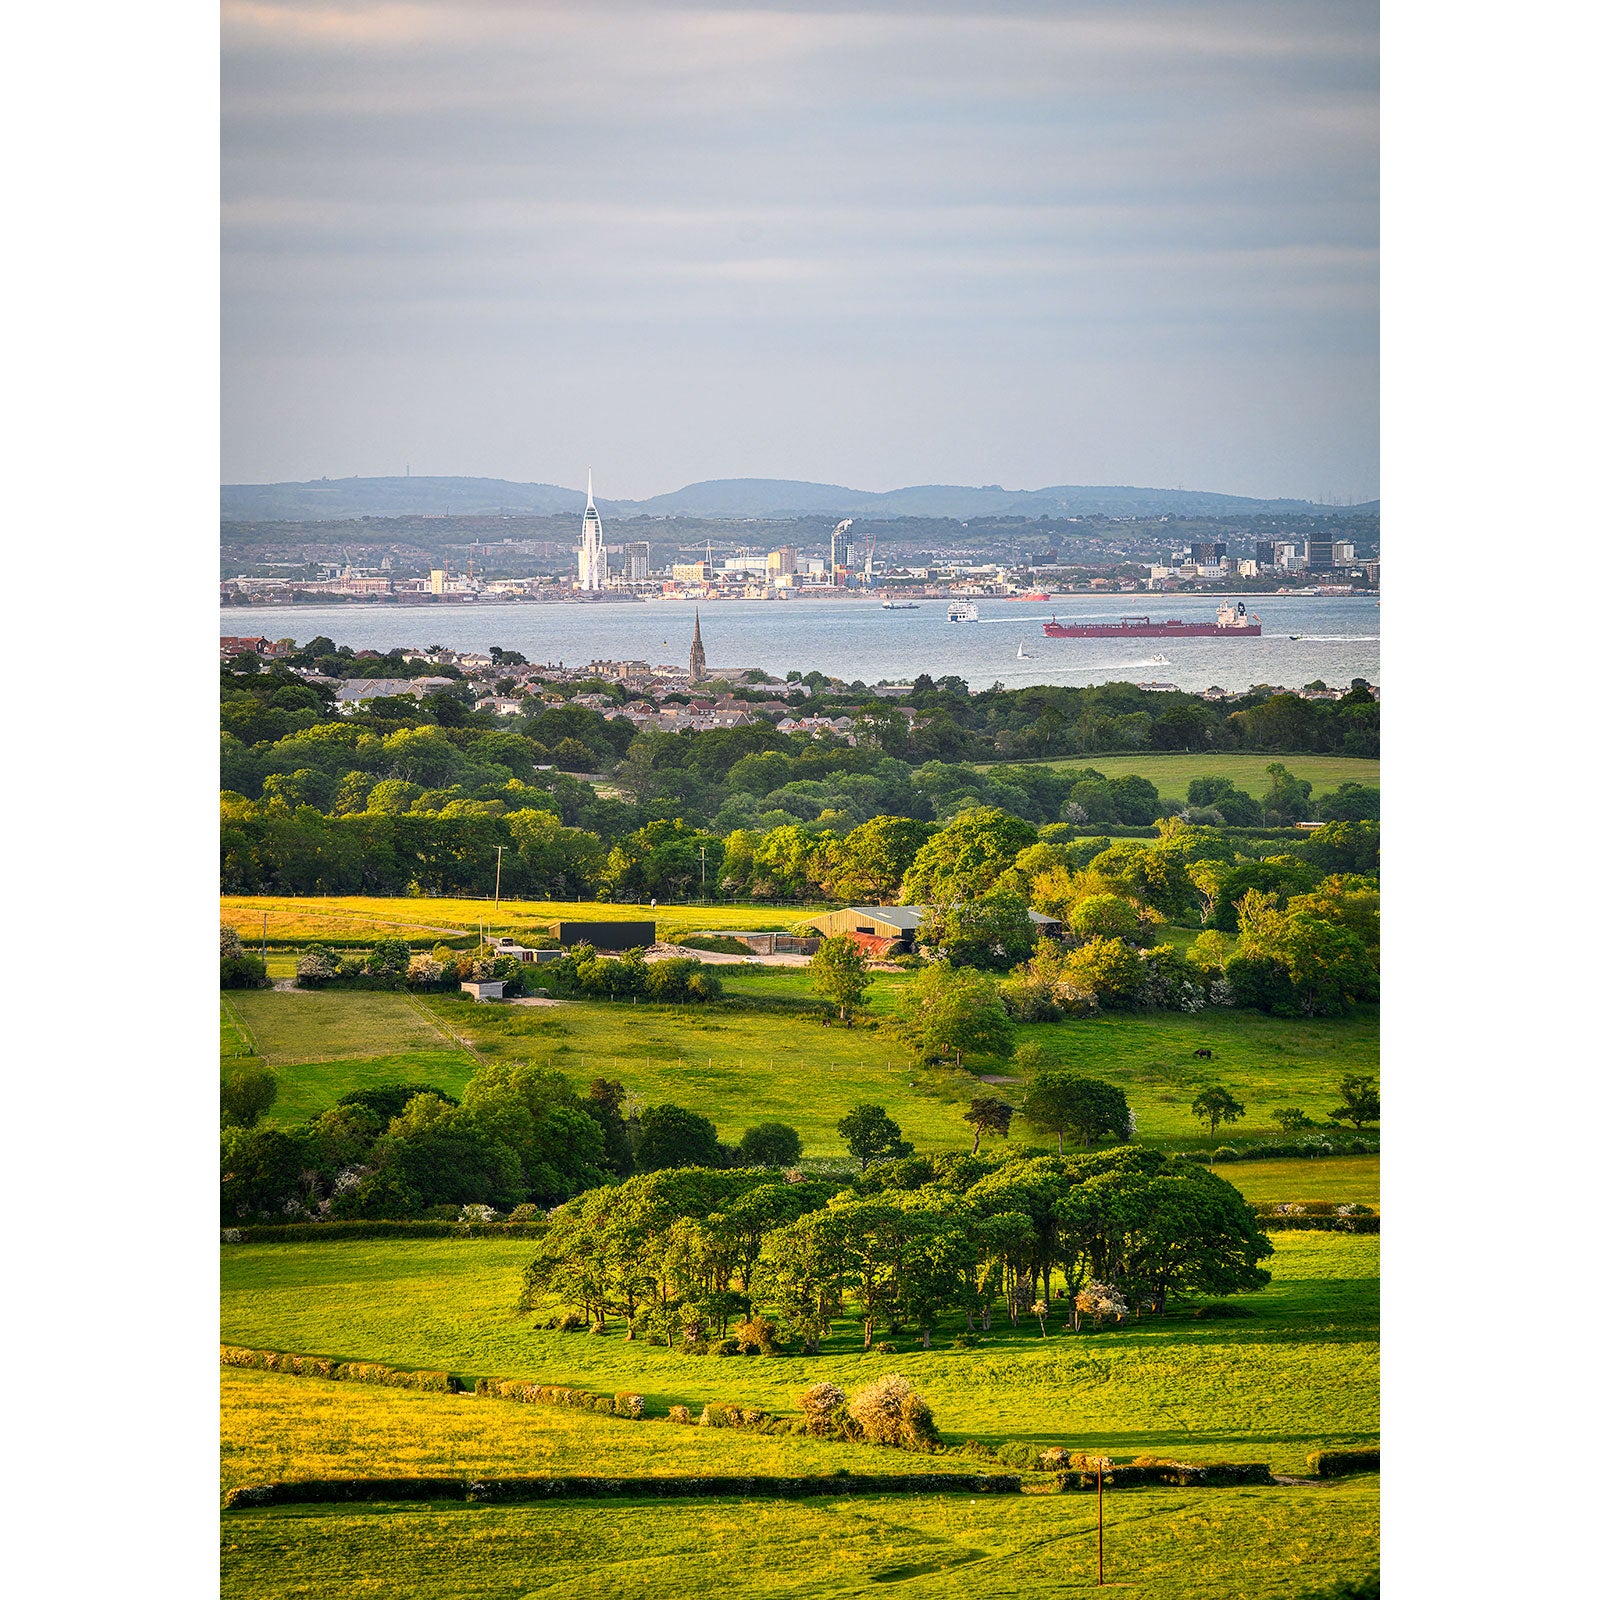 Lush green foreground with scattered trees leading to a cityscape and industrial harbor in the distance, under a cloudy sky on the Isle of Wight. - View from Ashey Down by Available Light Photography